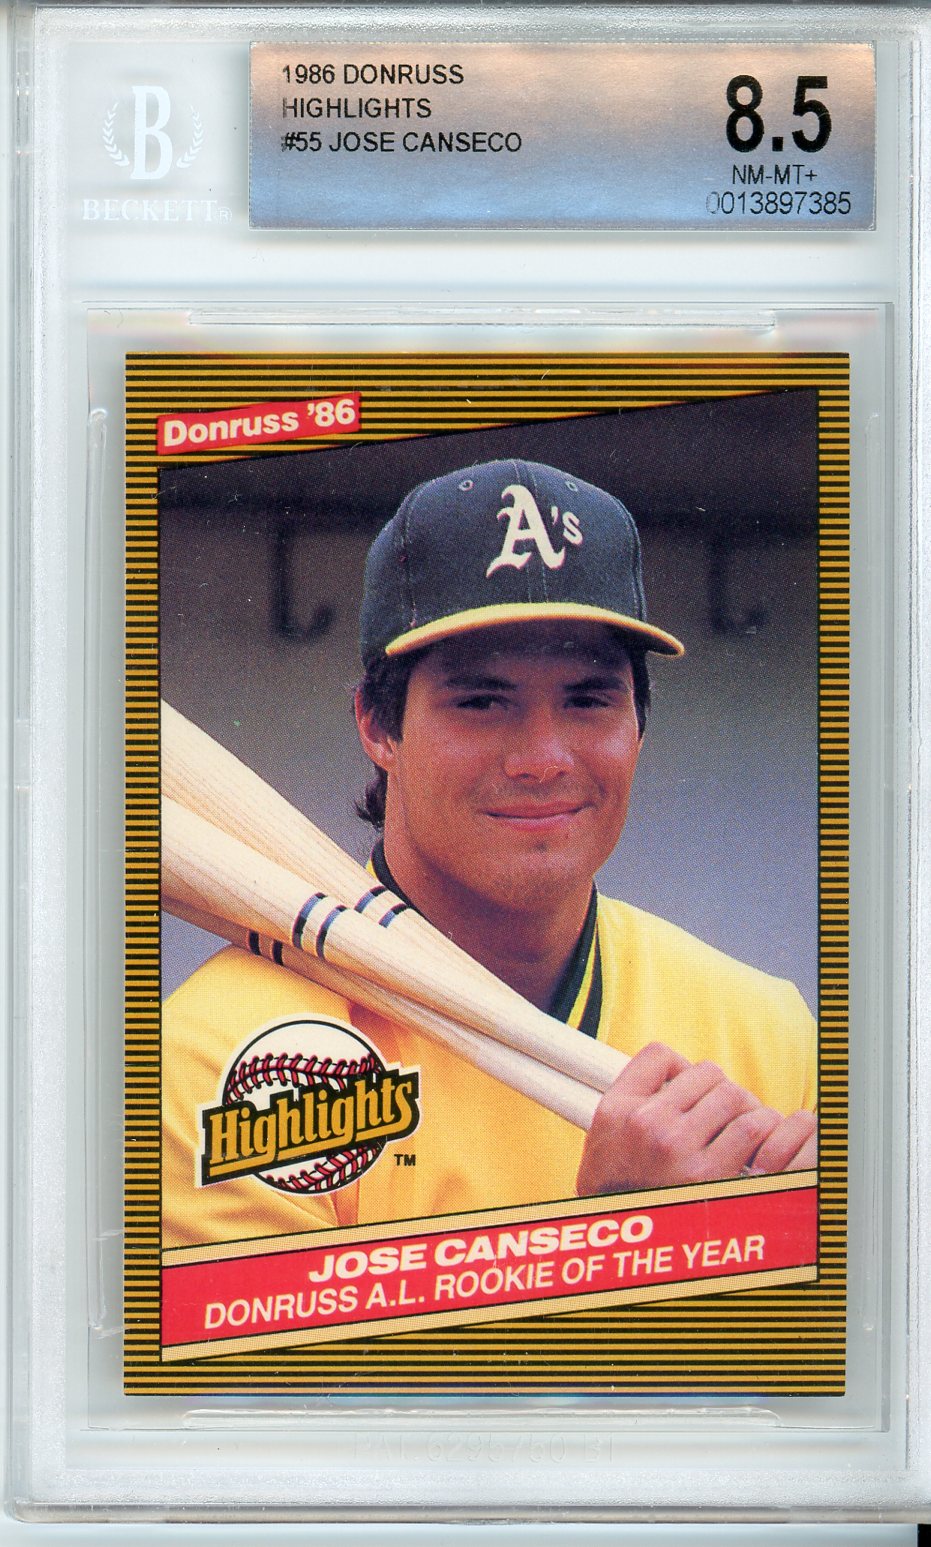 1986 Donruss Highlights #55 Jose Canseco Rookie of the Year Card